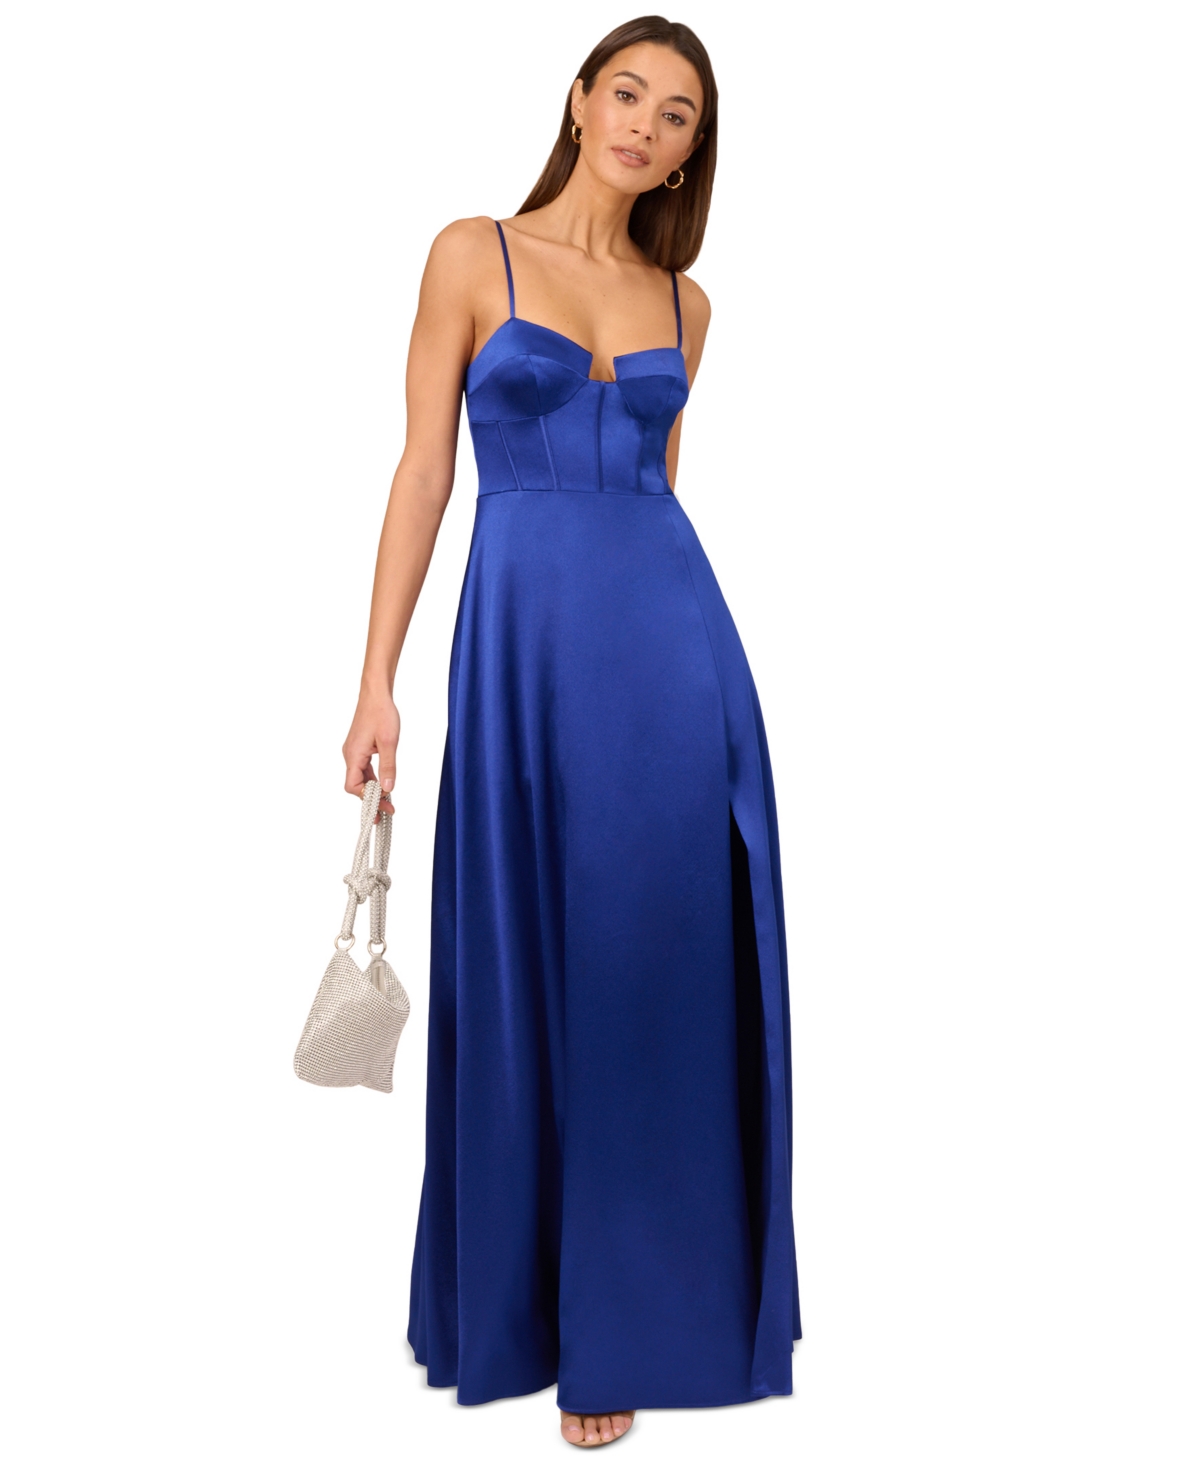 Adrianna By Adrianna Papell Women's Satin Corset Maxi Dress In Royal Sapphire